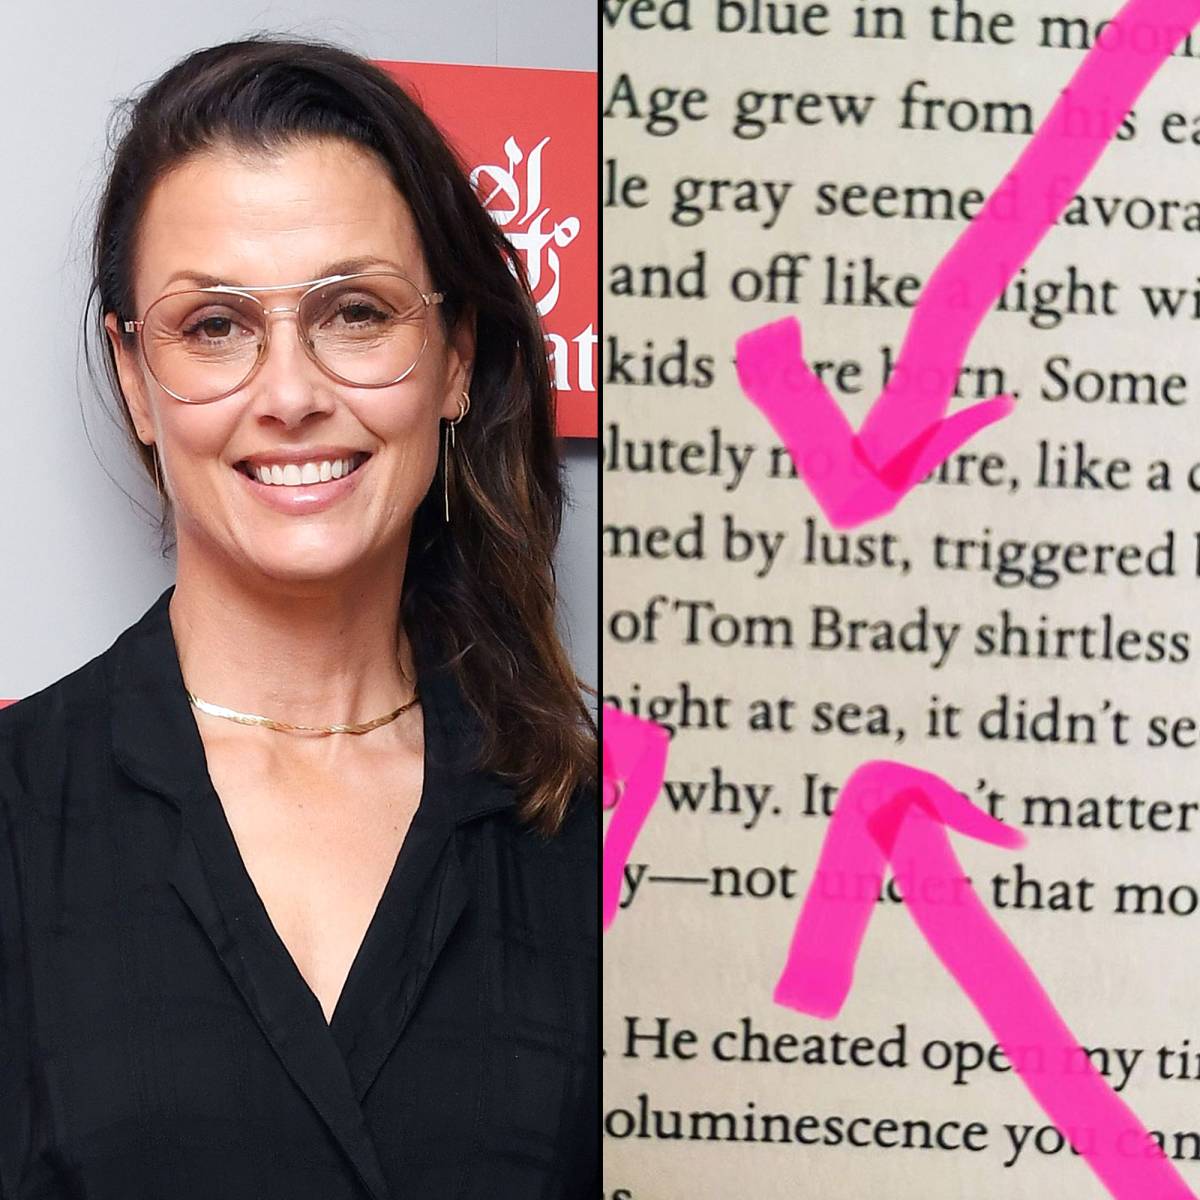 Tom Brady Allegedly Decided to Leave Ex-girlfriend Bridget Moynahan While  She Was Pregnant With His Child - The SportsRush